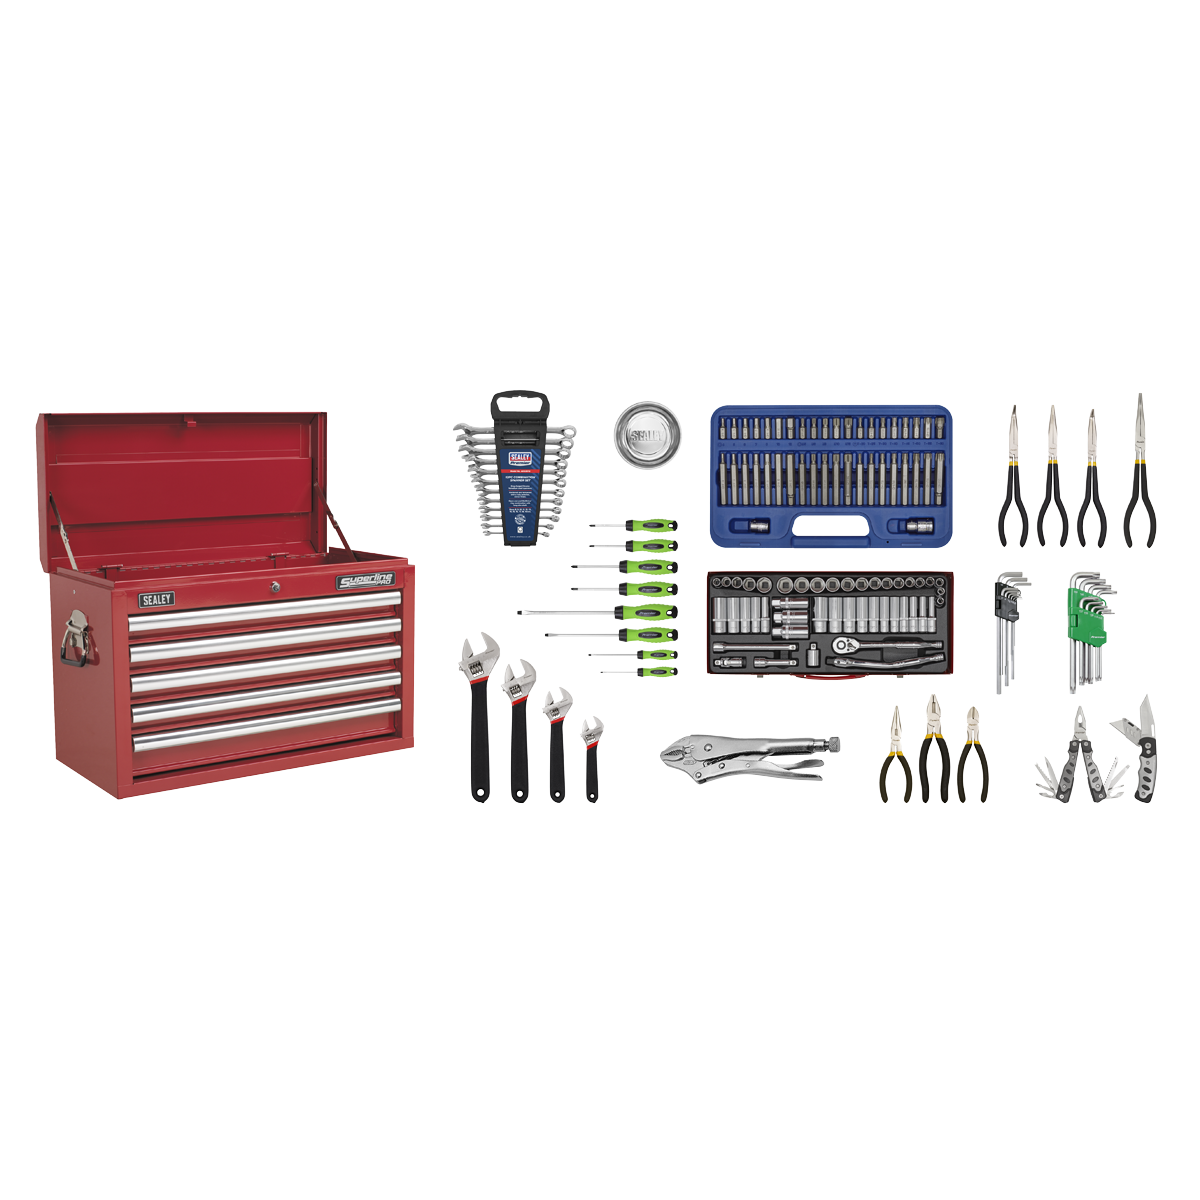 Topchest 5 Drawer with Ball-Bearing Slides - Red & 140pc Tool Kit - AP33059COMBO - Farming Parts